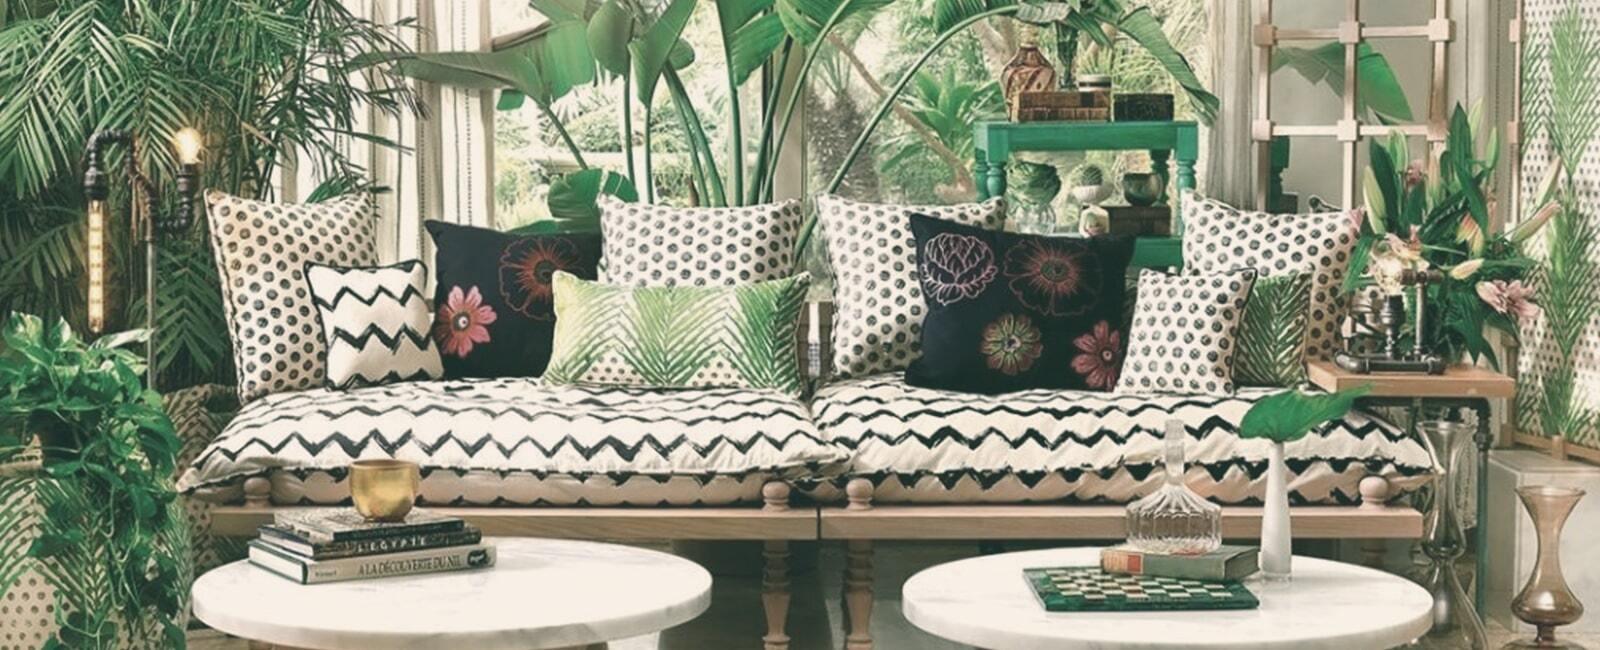 3 Tips to get you started with Bohemian Interiors. - Fabriclore